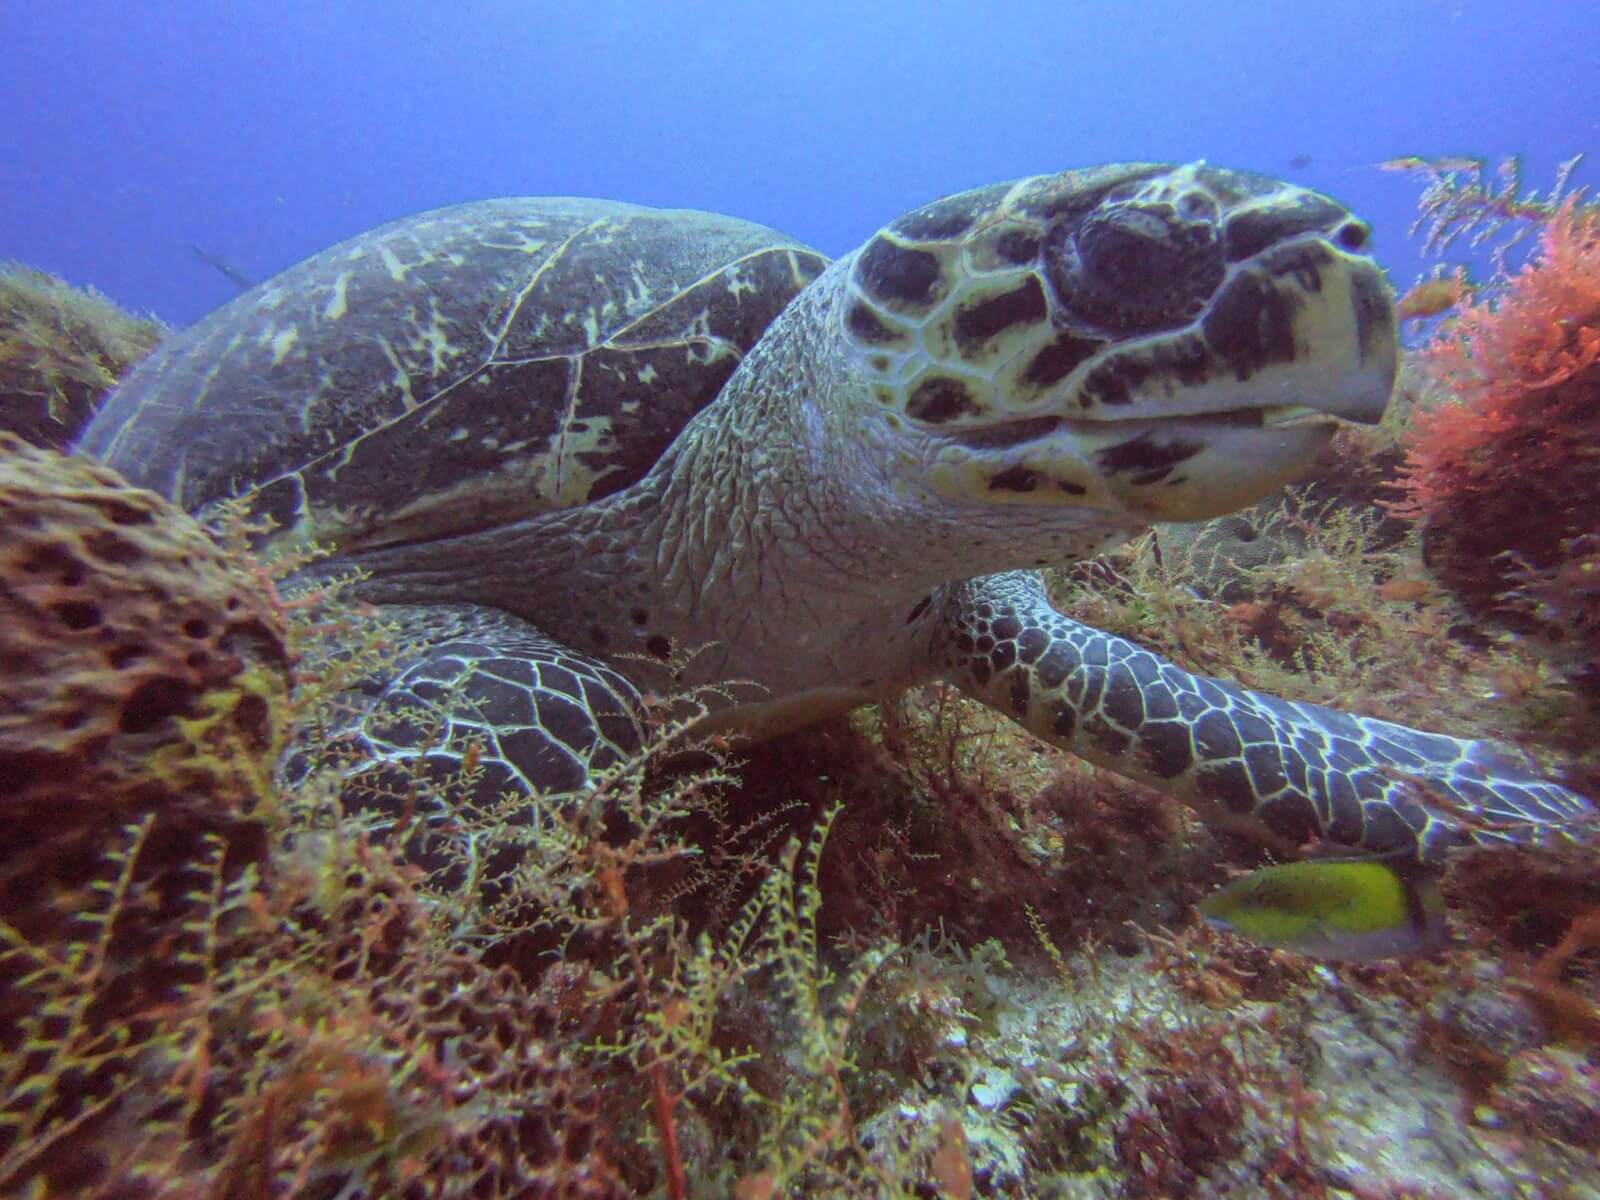 A turtle close up in Cozumel